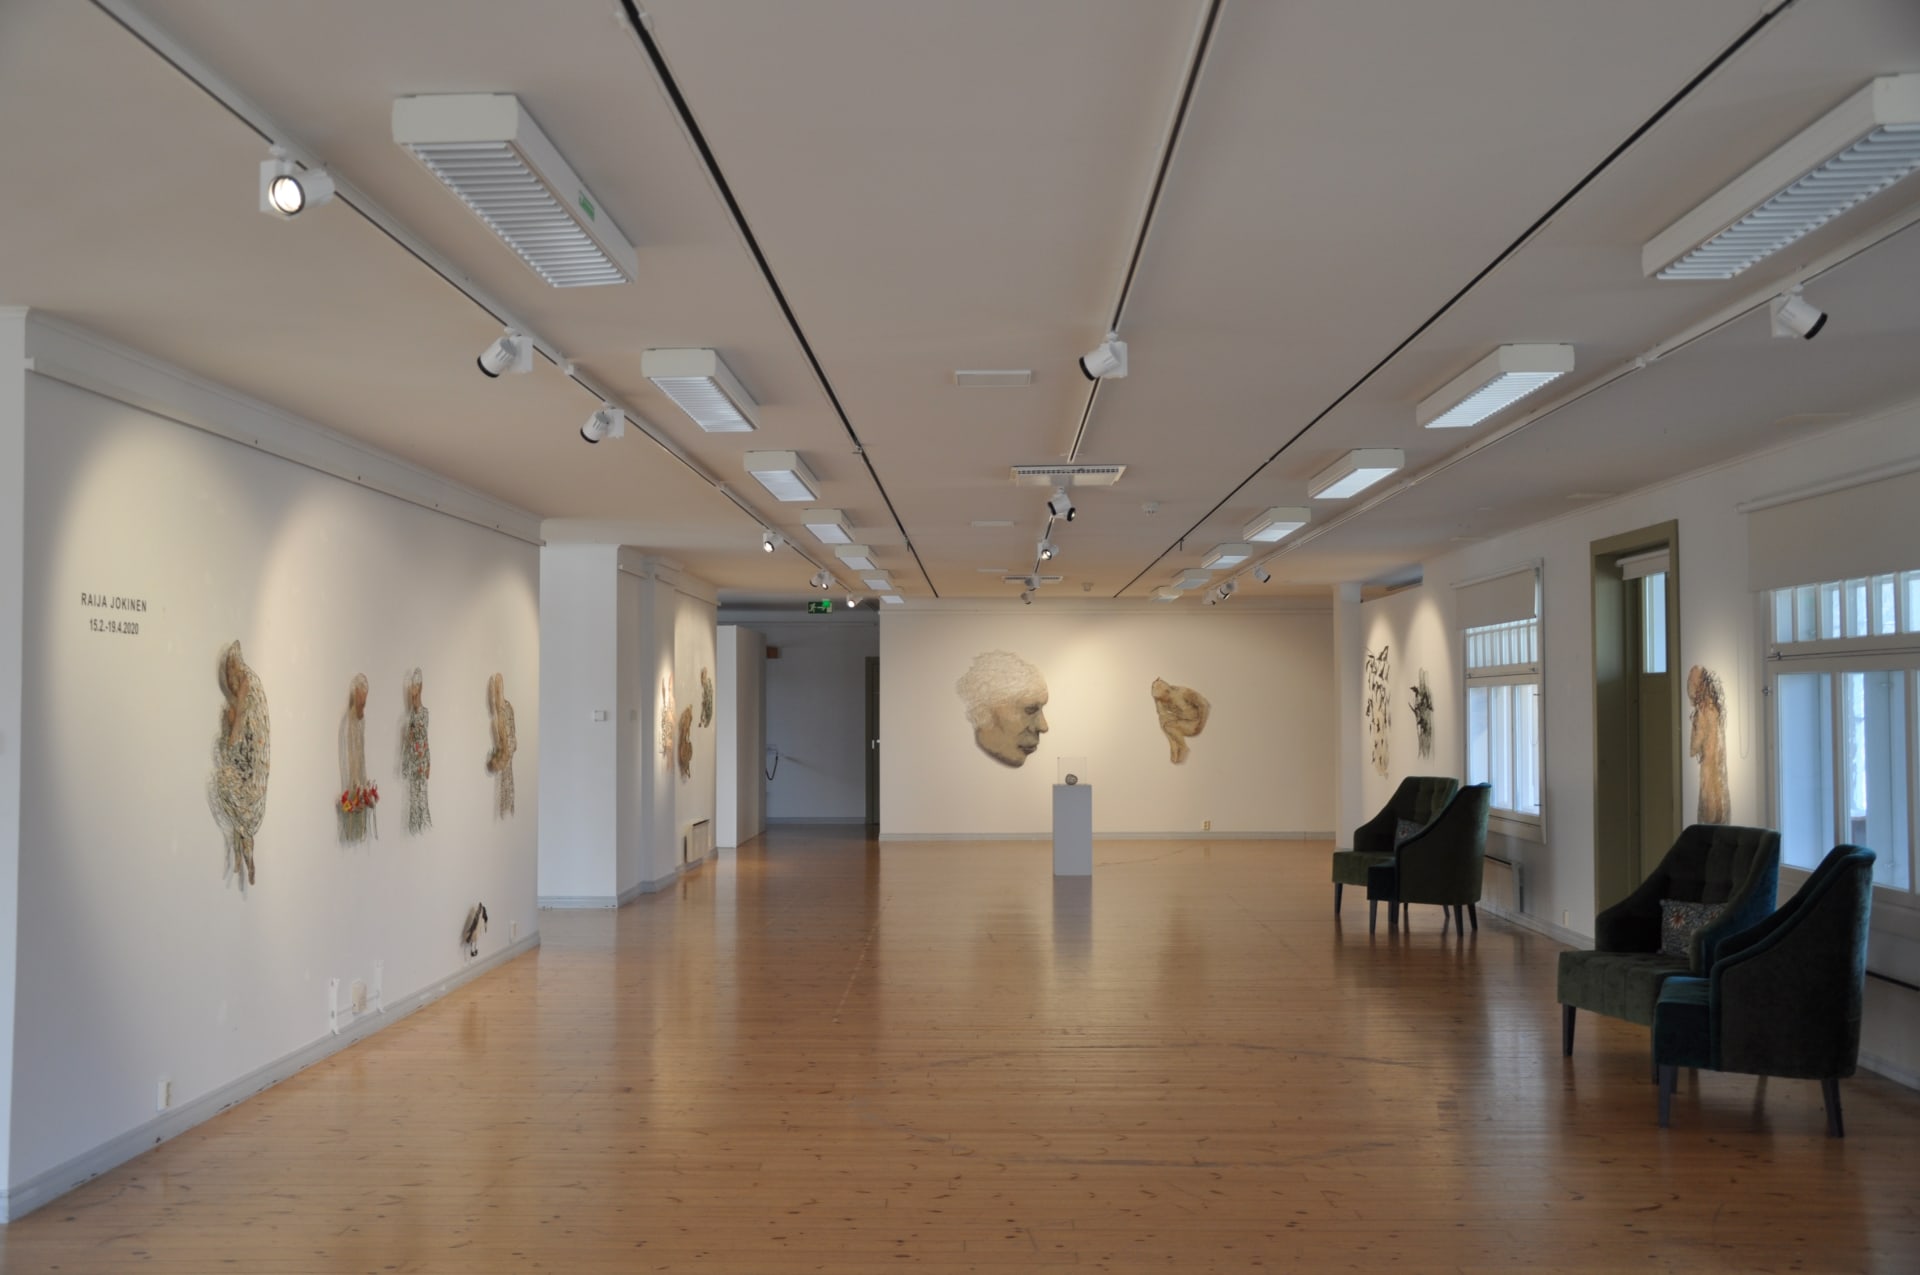 Exhibition hall, artworks and chairs